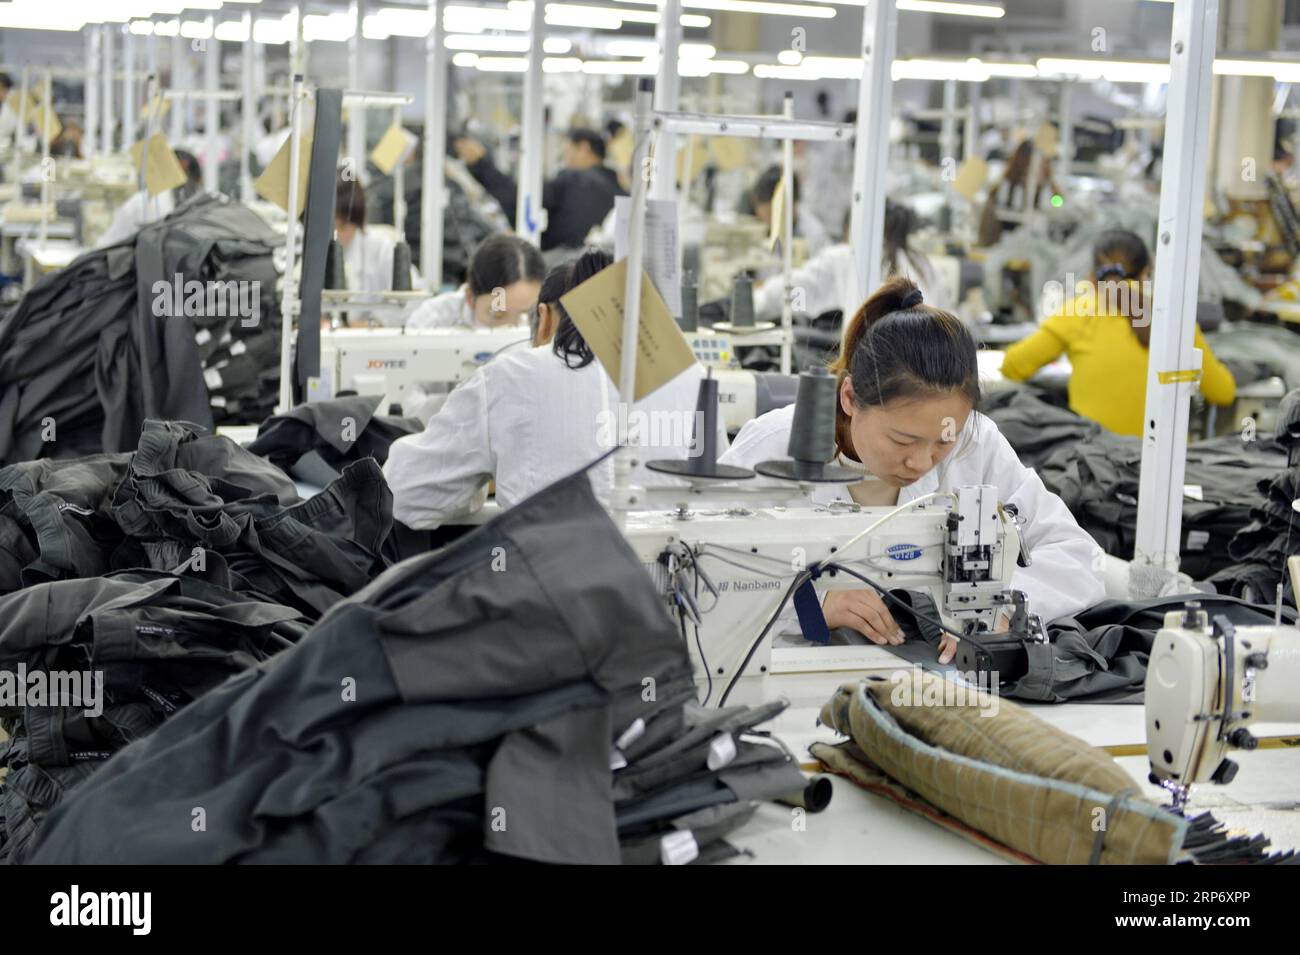 (190122) -- BEIJING, Jan. 22, 2019 (Xinhua) -- Workers sew clothes at a workshop of an enterprise in Ningjin County, north China s Heibei Province, Dec. 29, 2018. China s economy grew 6.6 percent year on year in 2018, beating the official annual target of around 6.5 percent, data from the National Bureau of Statistics (NBS) showed Monday. The country s gross domestic product (GDP) hit 90.03 trillion yuan (about 13.32 trillion U.S. dollars) in 2018. The following are a group of facts and figures released by the NBS on its solid economic performance last year. -- China s fixed-asset investment g Stock Photo